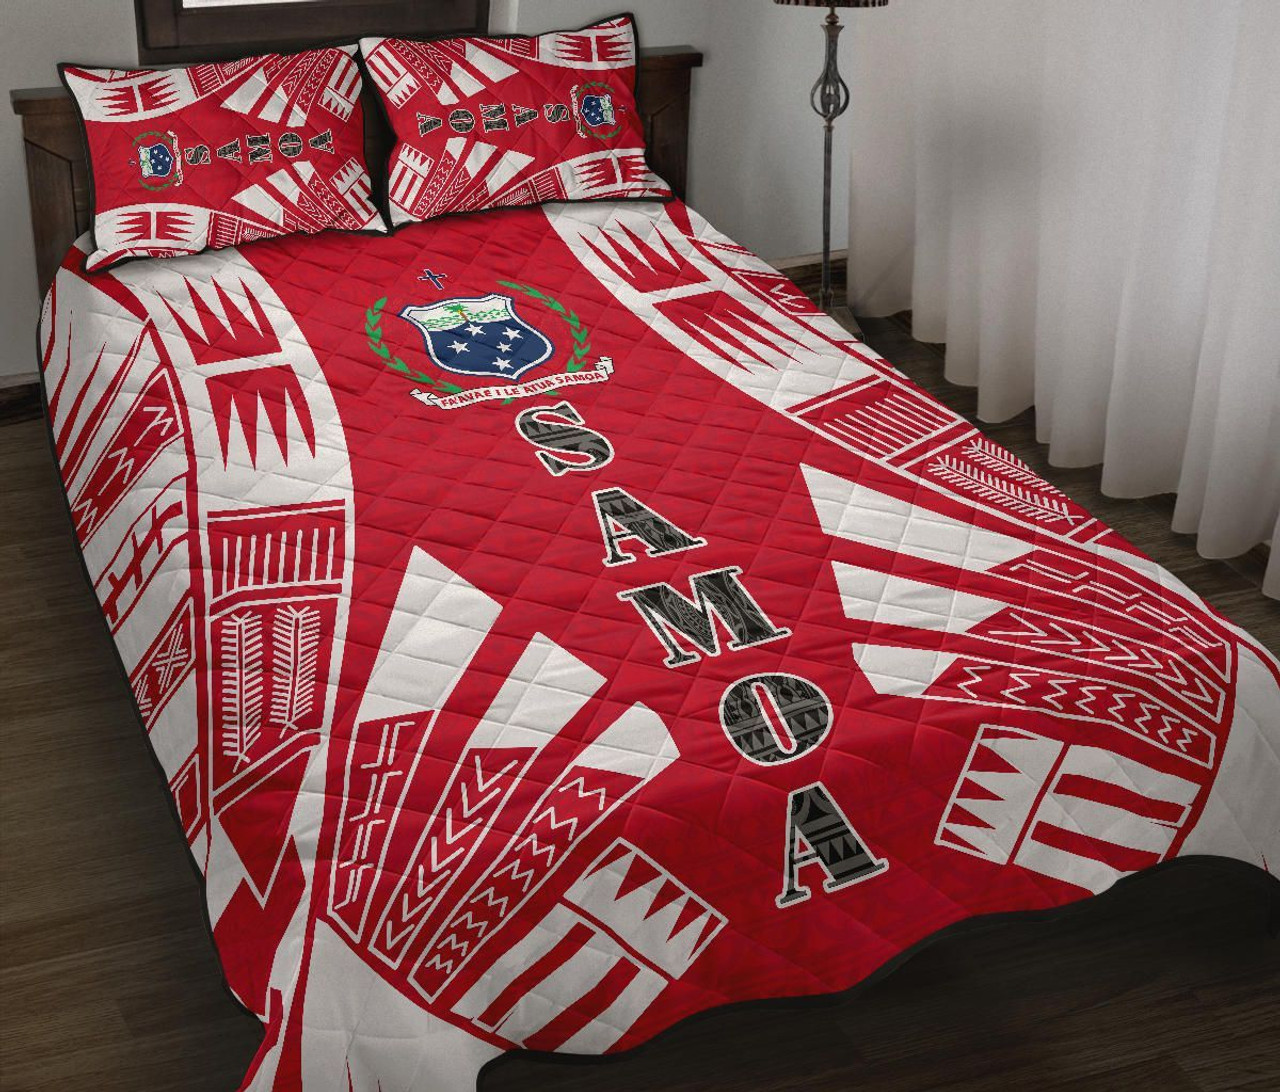 Samoa Quilt Bed Set - Samoa Coat Of Arms Polynesian Red Tattoo Style 2